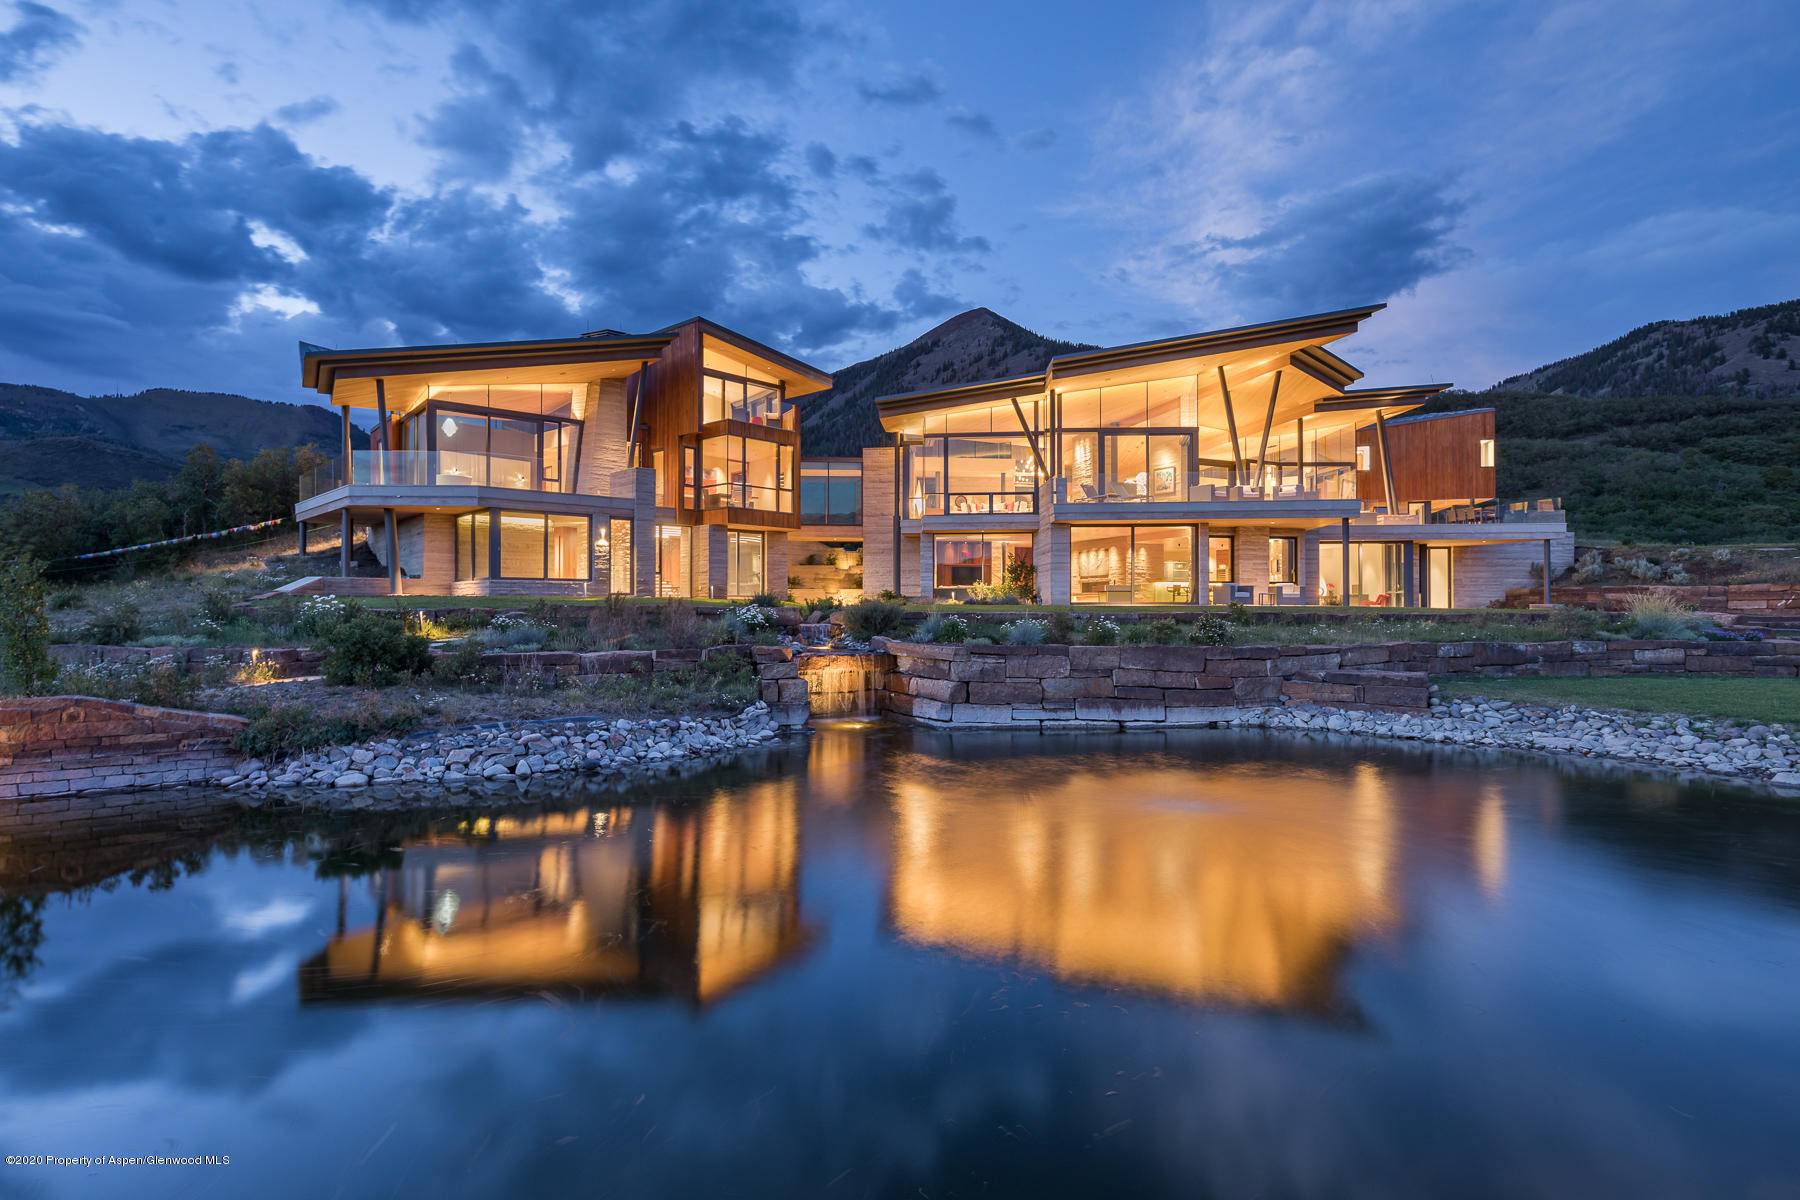 This modern architectural masterpiece is perched on a point featuring thrilling views of Telluride's most dramatic peaks.